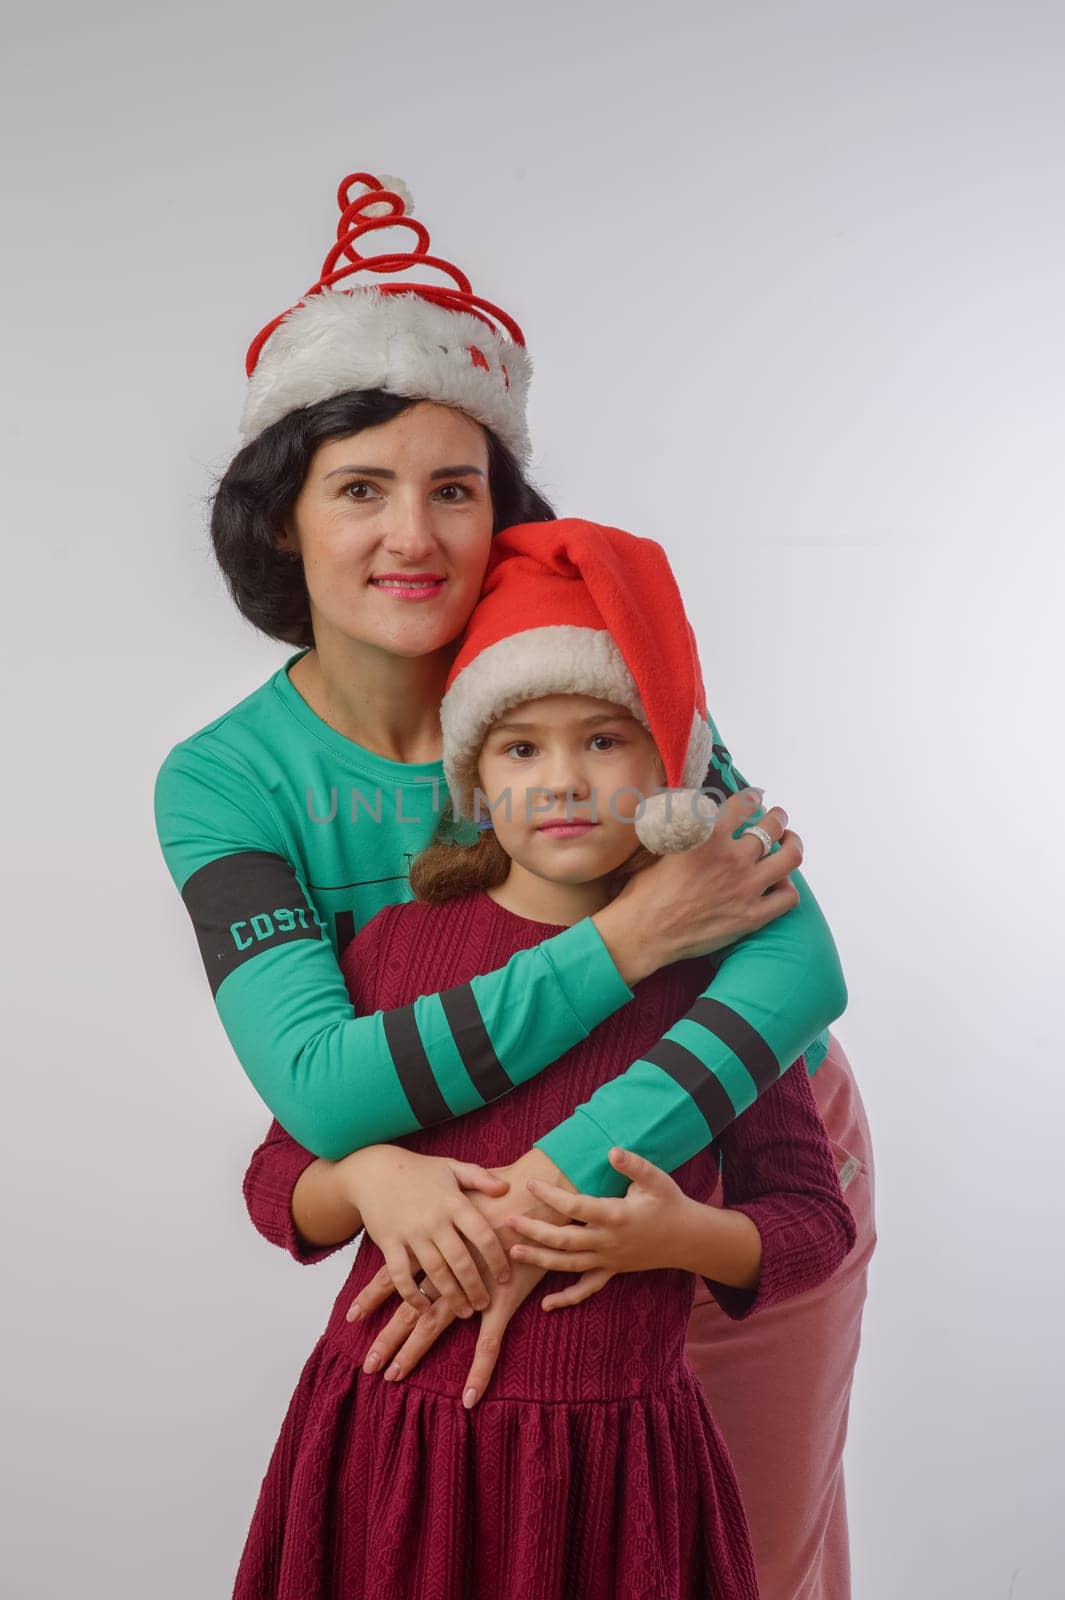 mother and daughter new year studio portrait happy family 2 by Mixa74